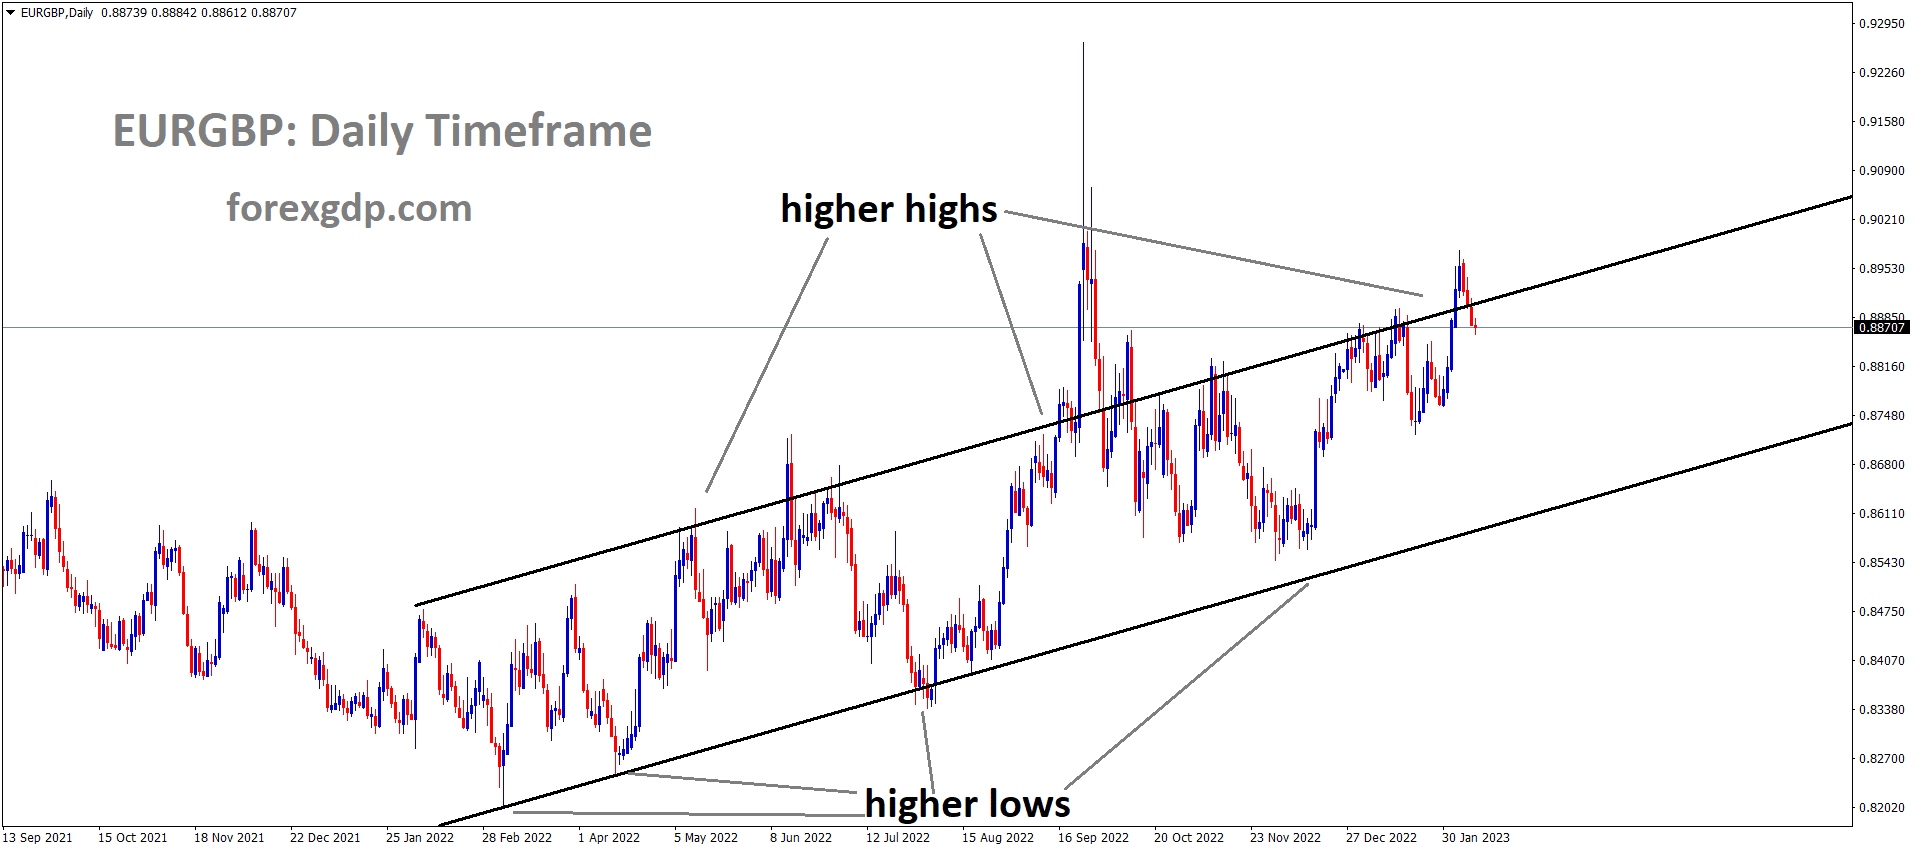 EURGBP Daily TF Analysis Market is moving in an Ascending channel and the market has reached the higher high area of the channel